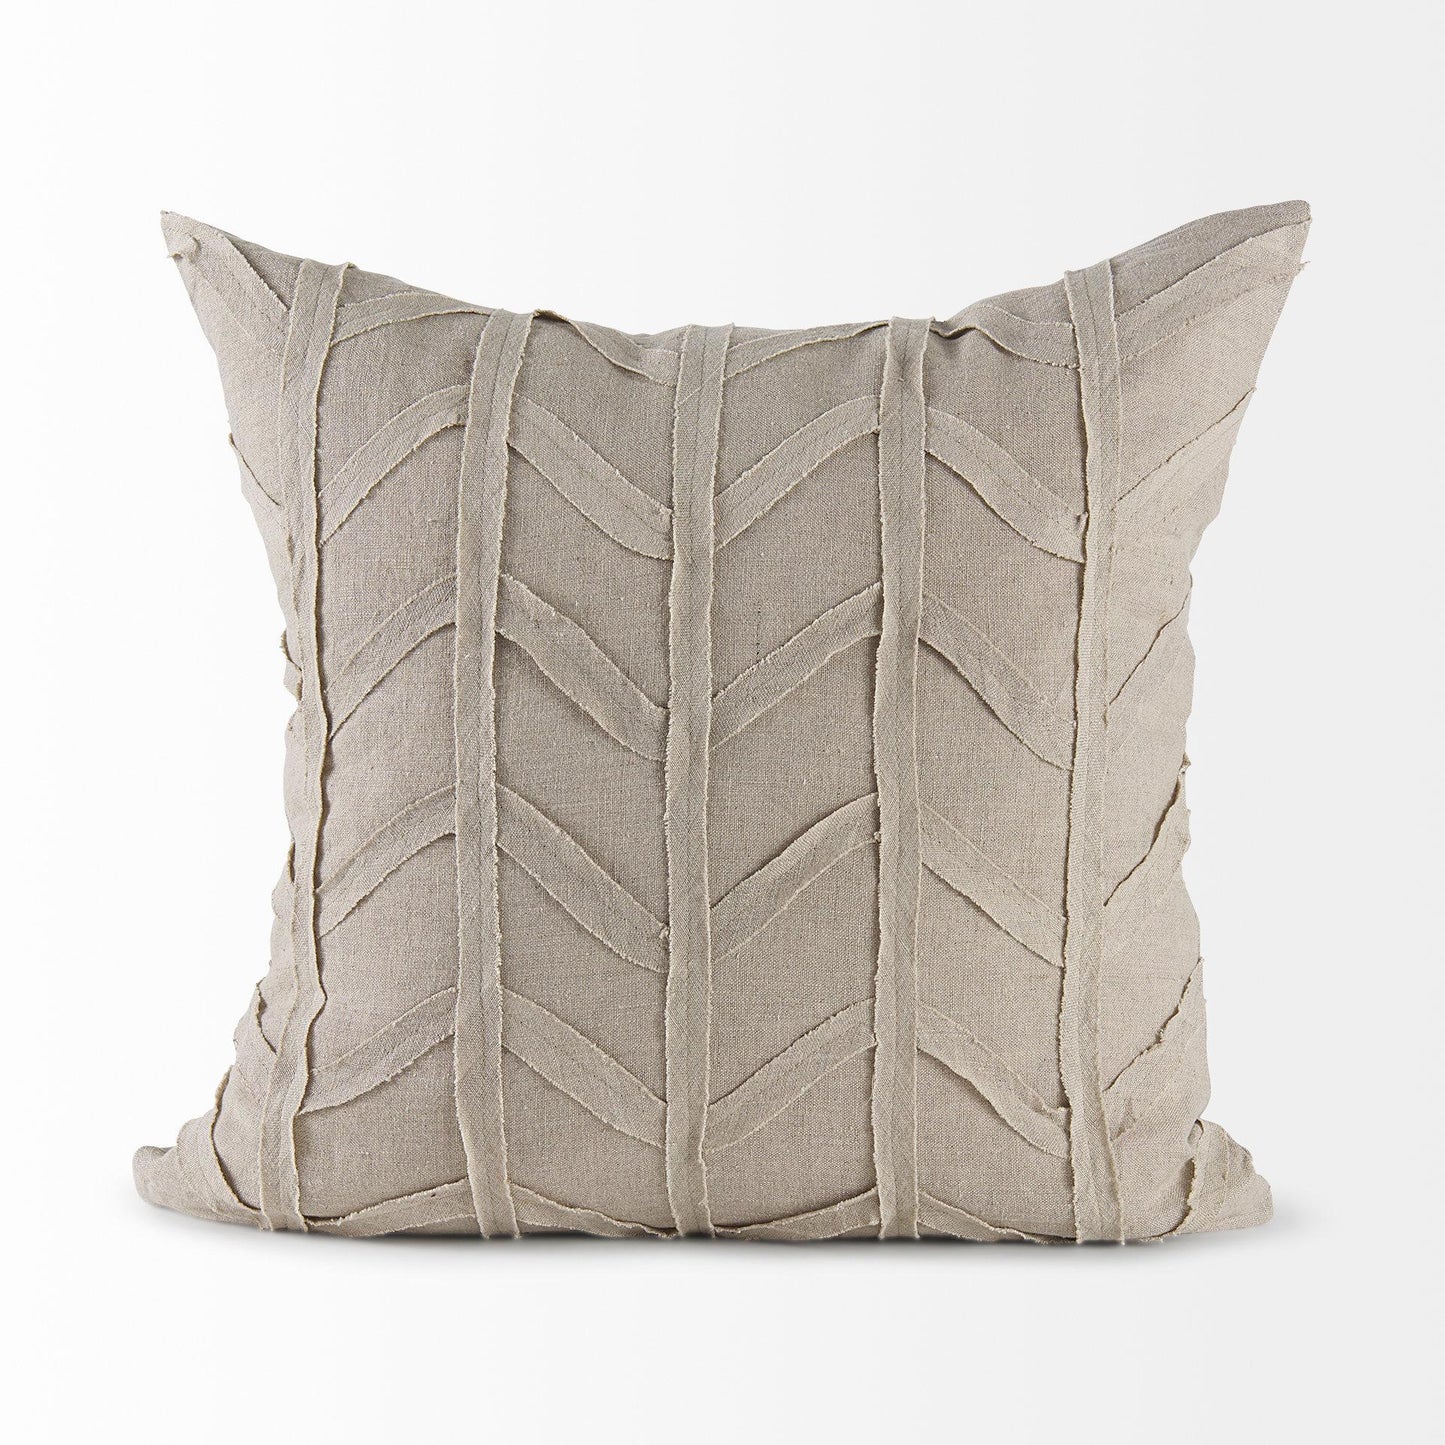 Ivivva 20L x 20W Beige Fabric Textured Decorative Pillow Cover